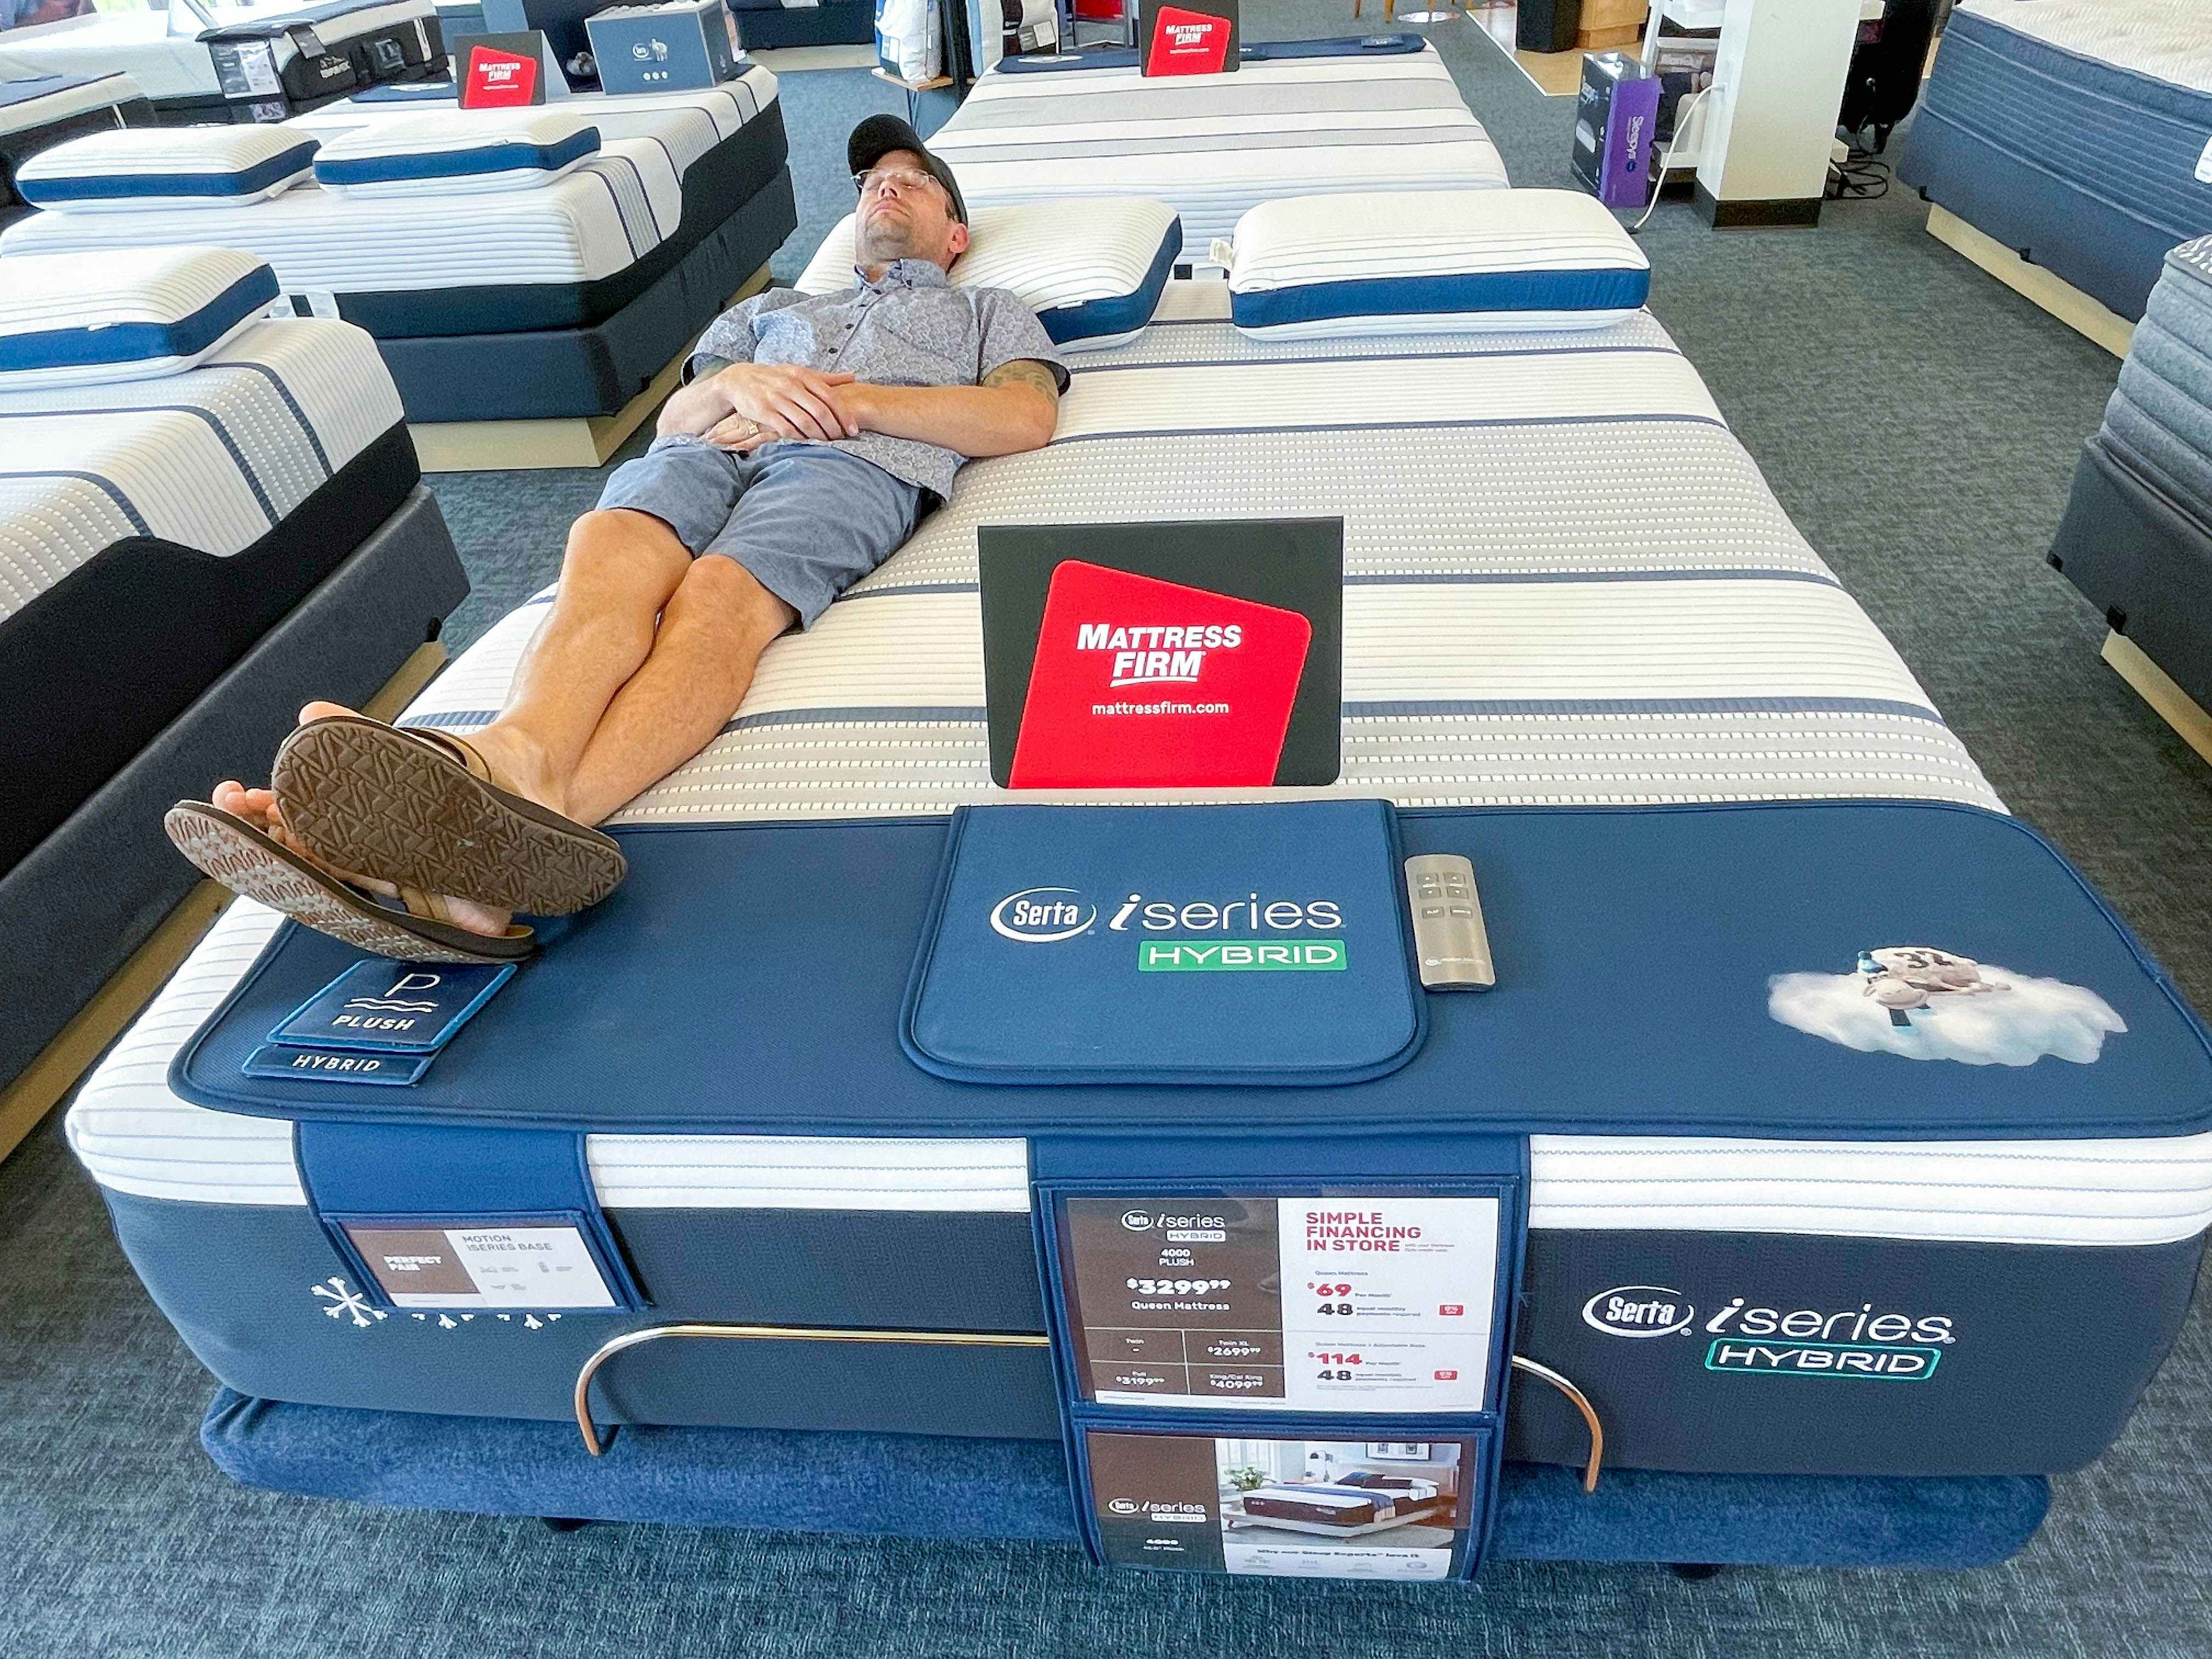 Mattress Firm display with man lying down and testing